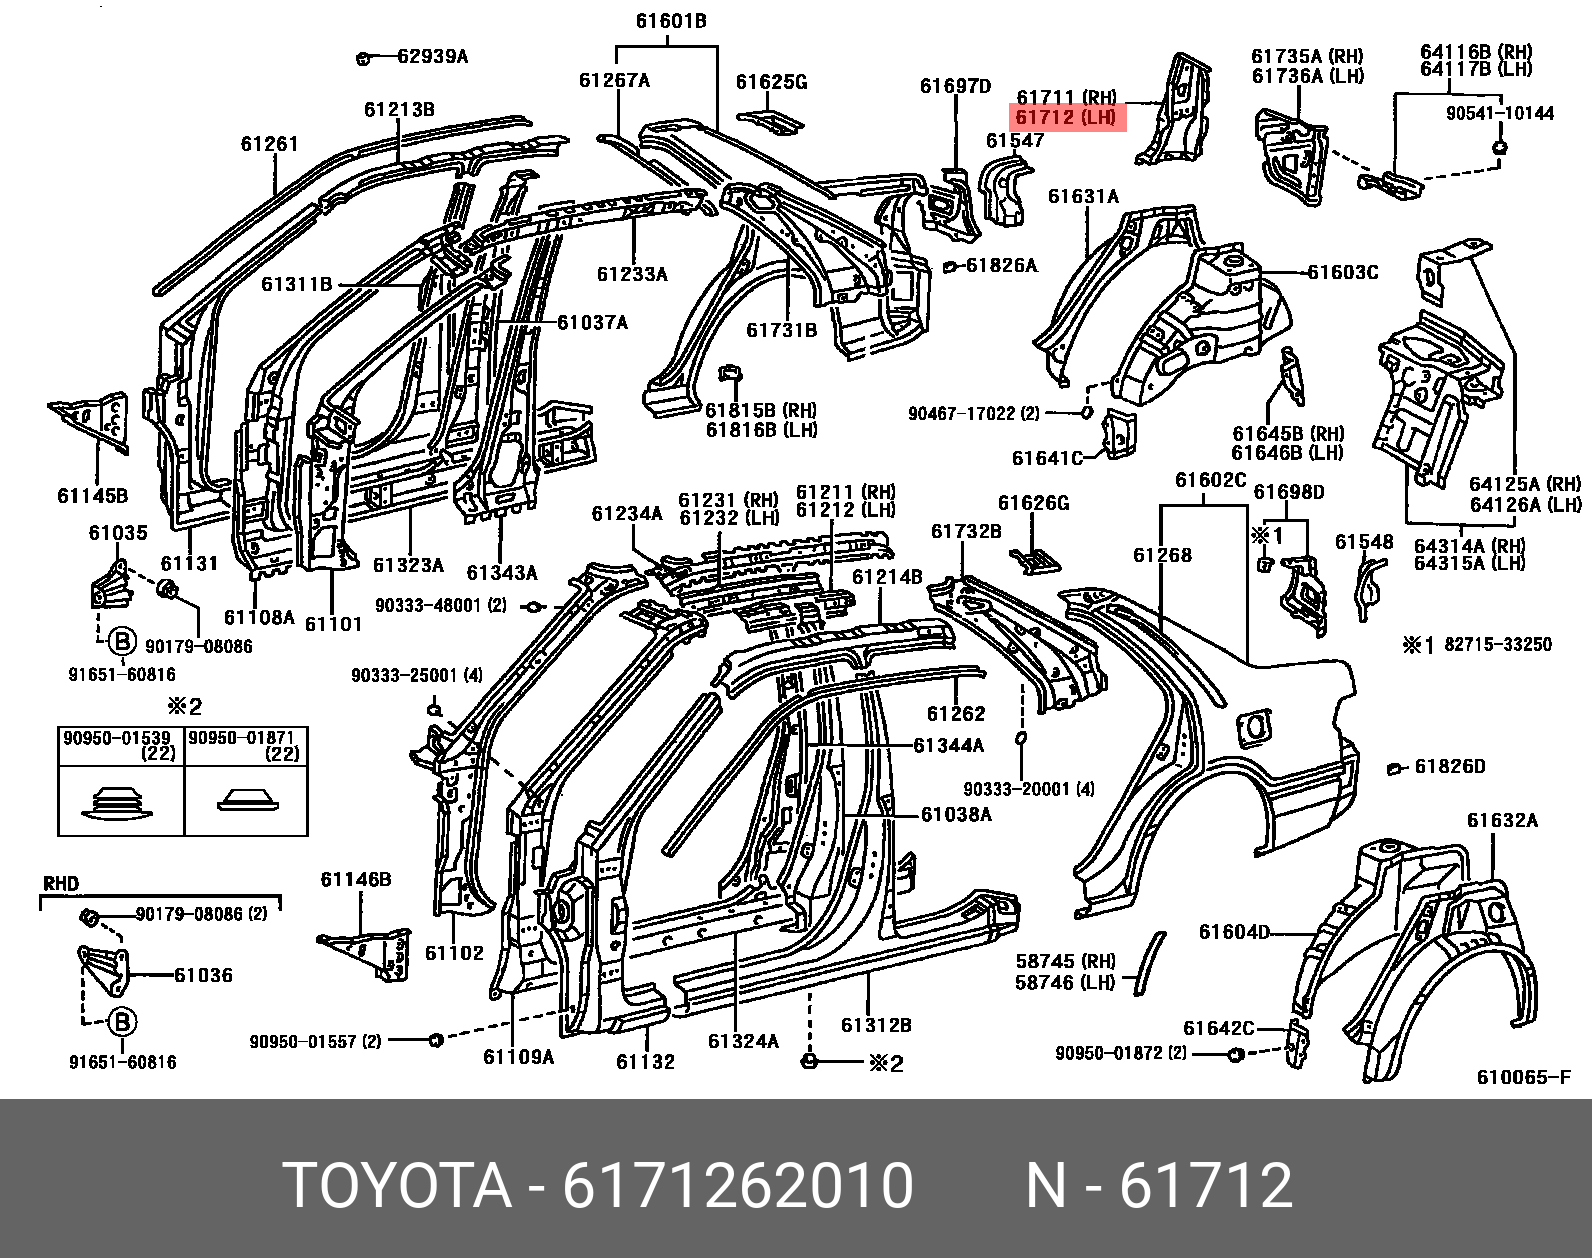 6171262010, MIRAI 201412 - 202006, JPD10, PANEL, ROOF SIDE, OUTER LH